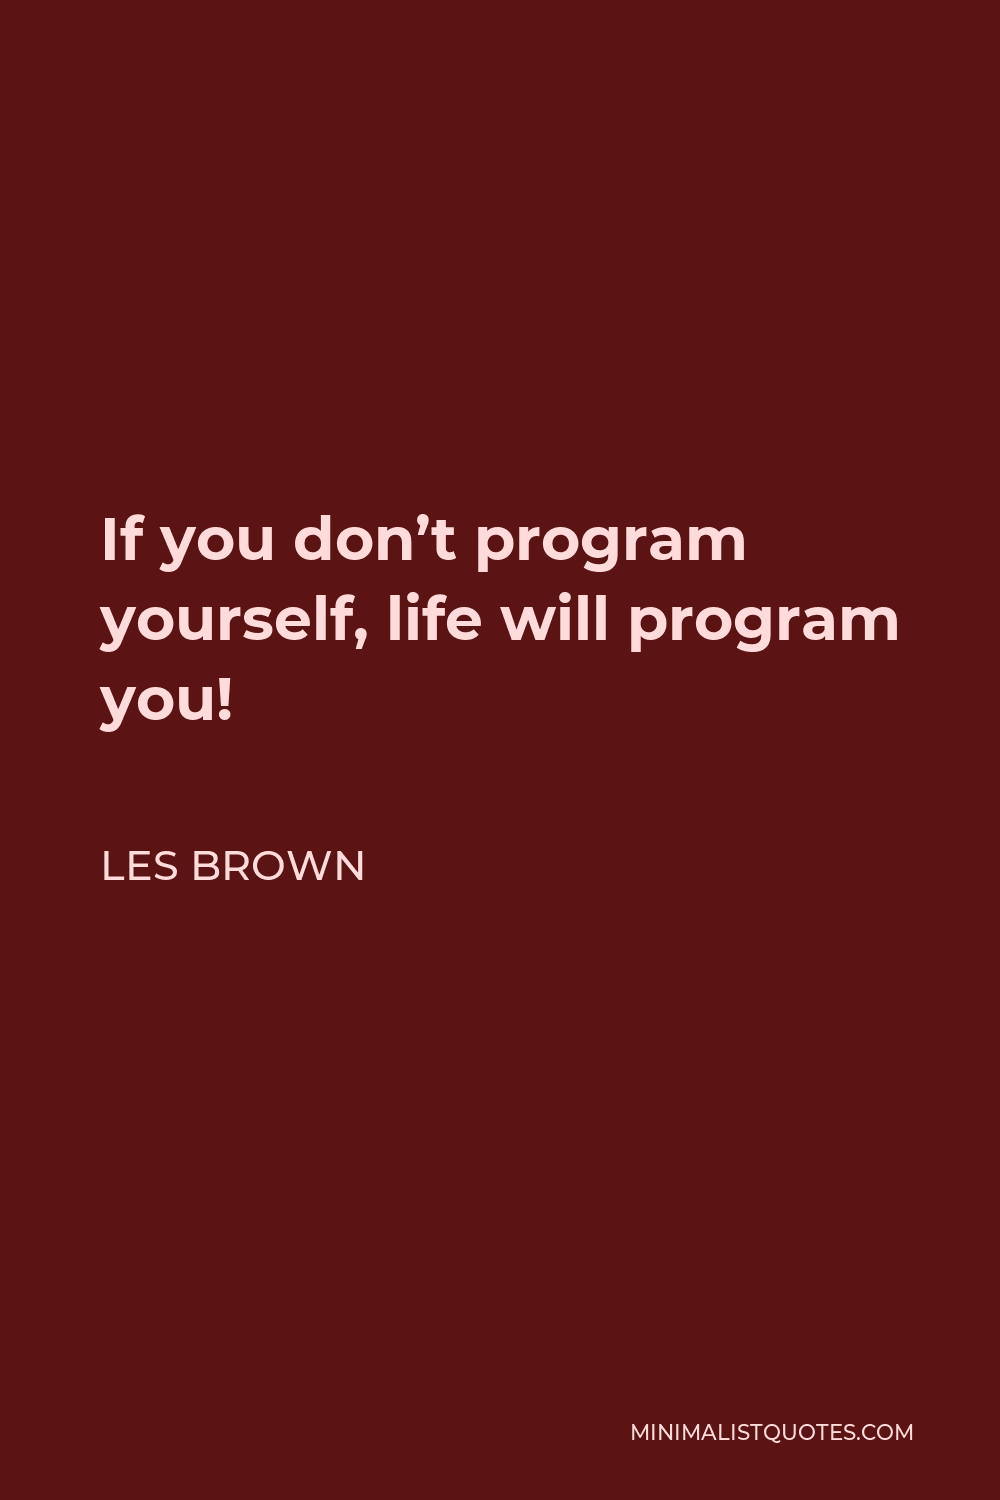 Les Brown Quote - If you don’t program yourself, life will program you!